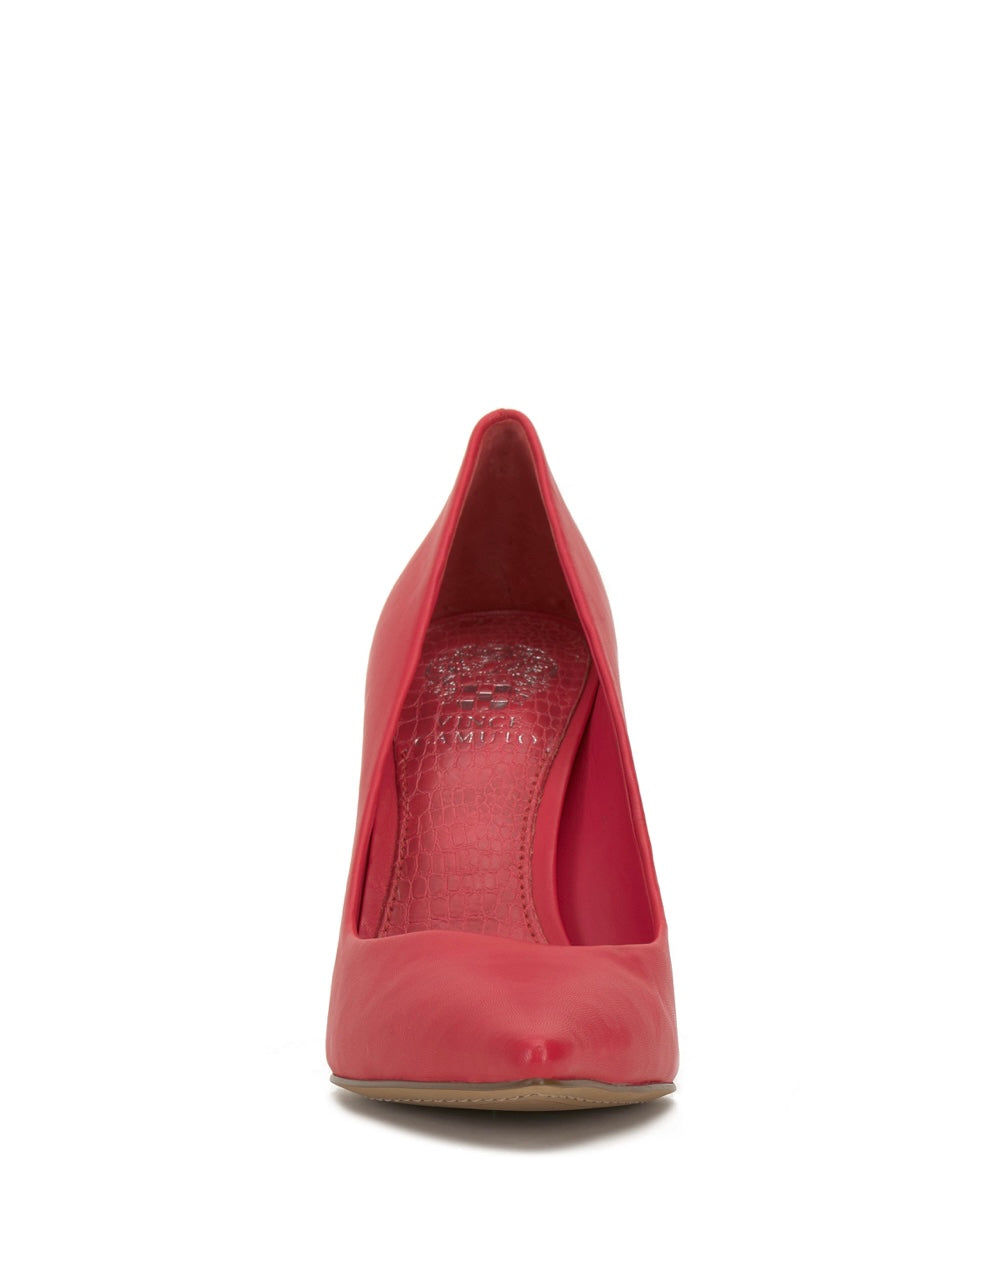 Vince Camuto Akenta Pump in Passion Red